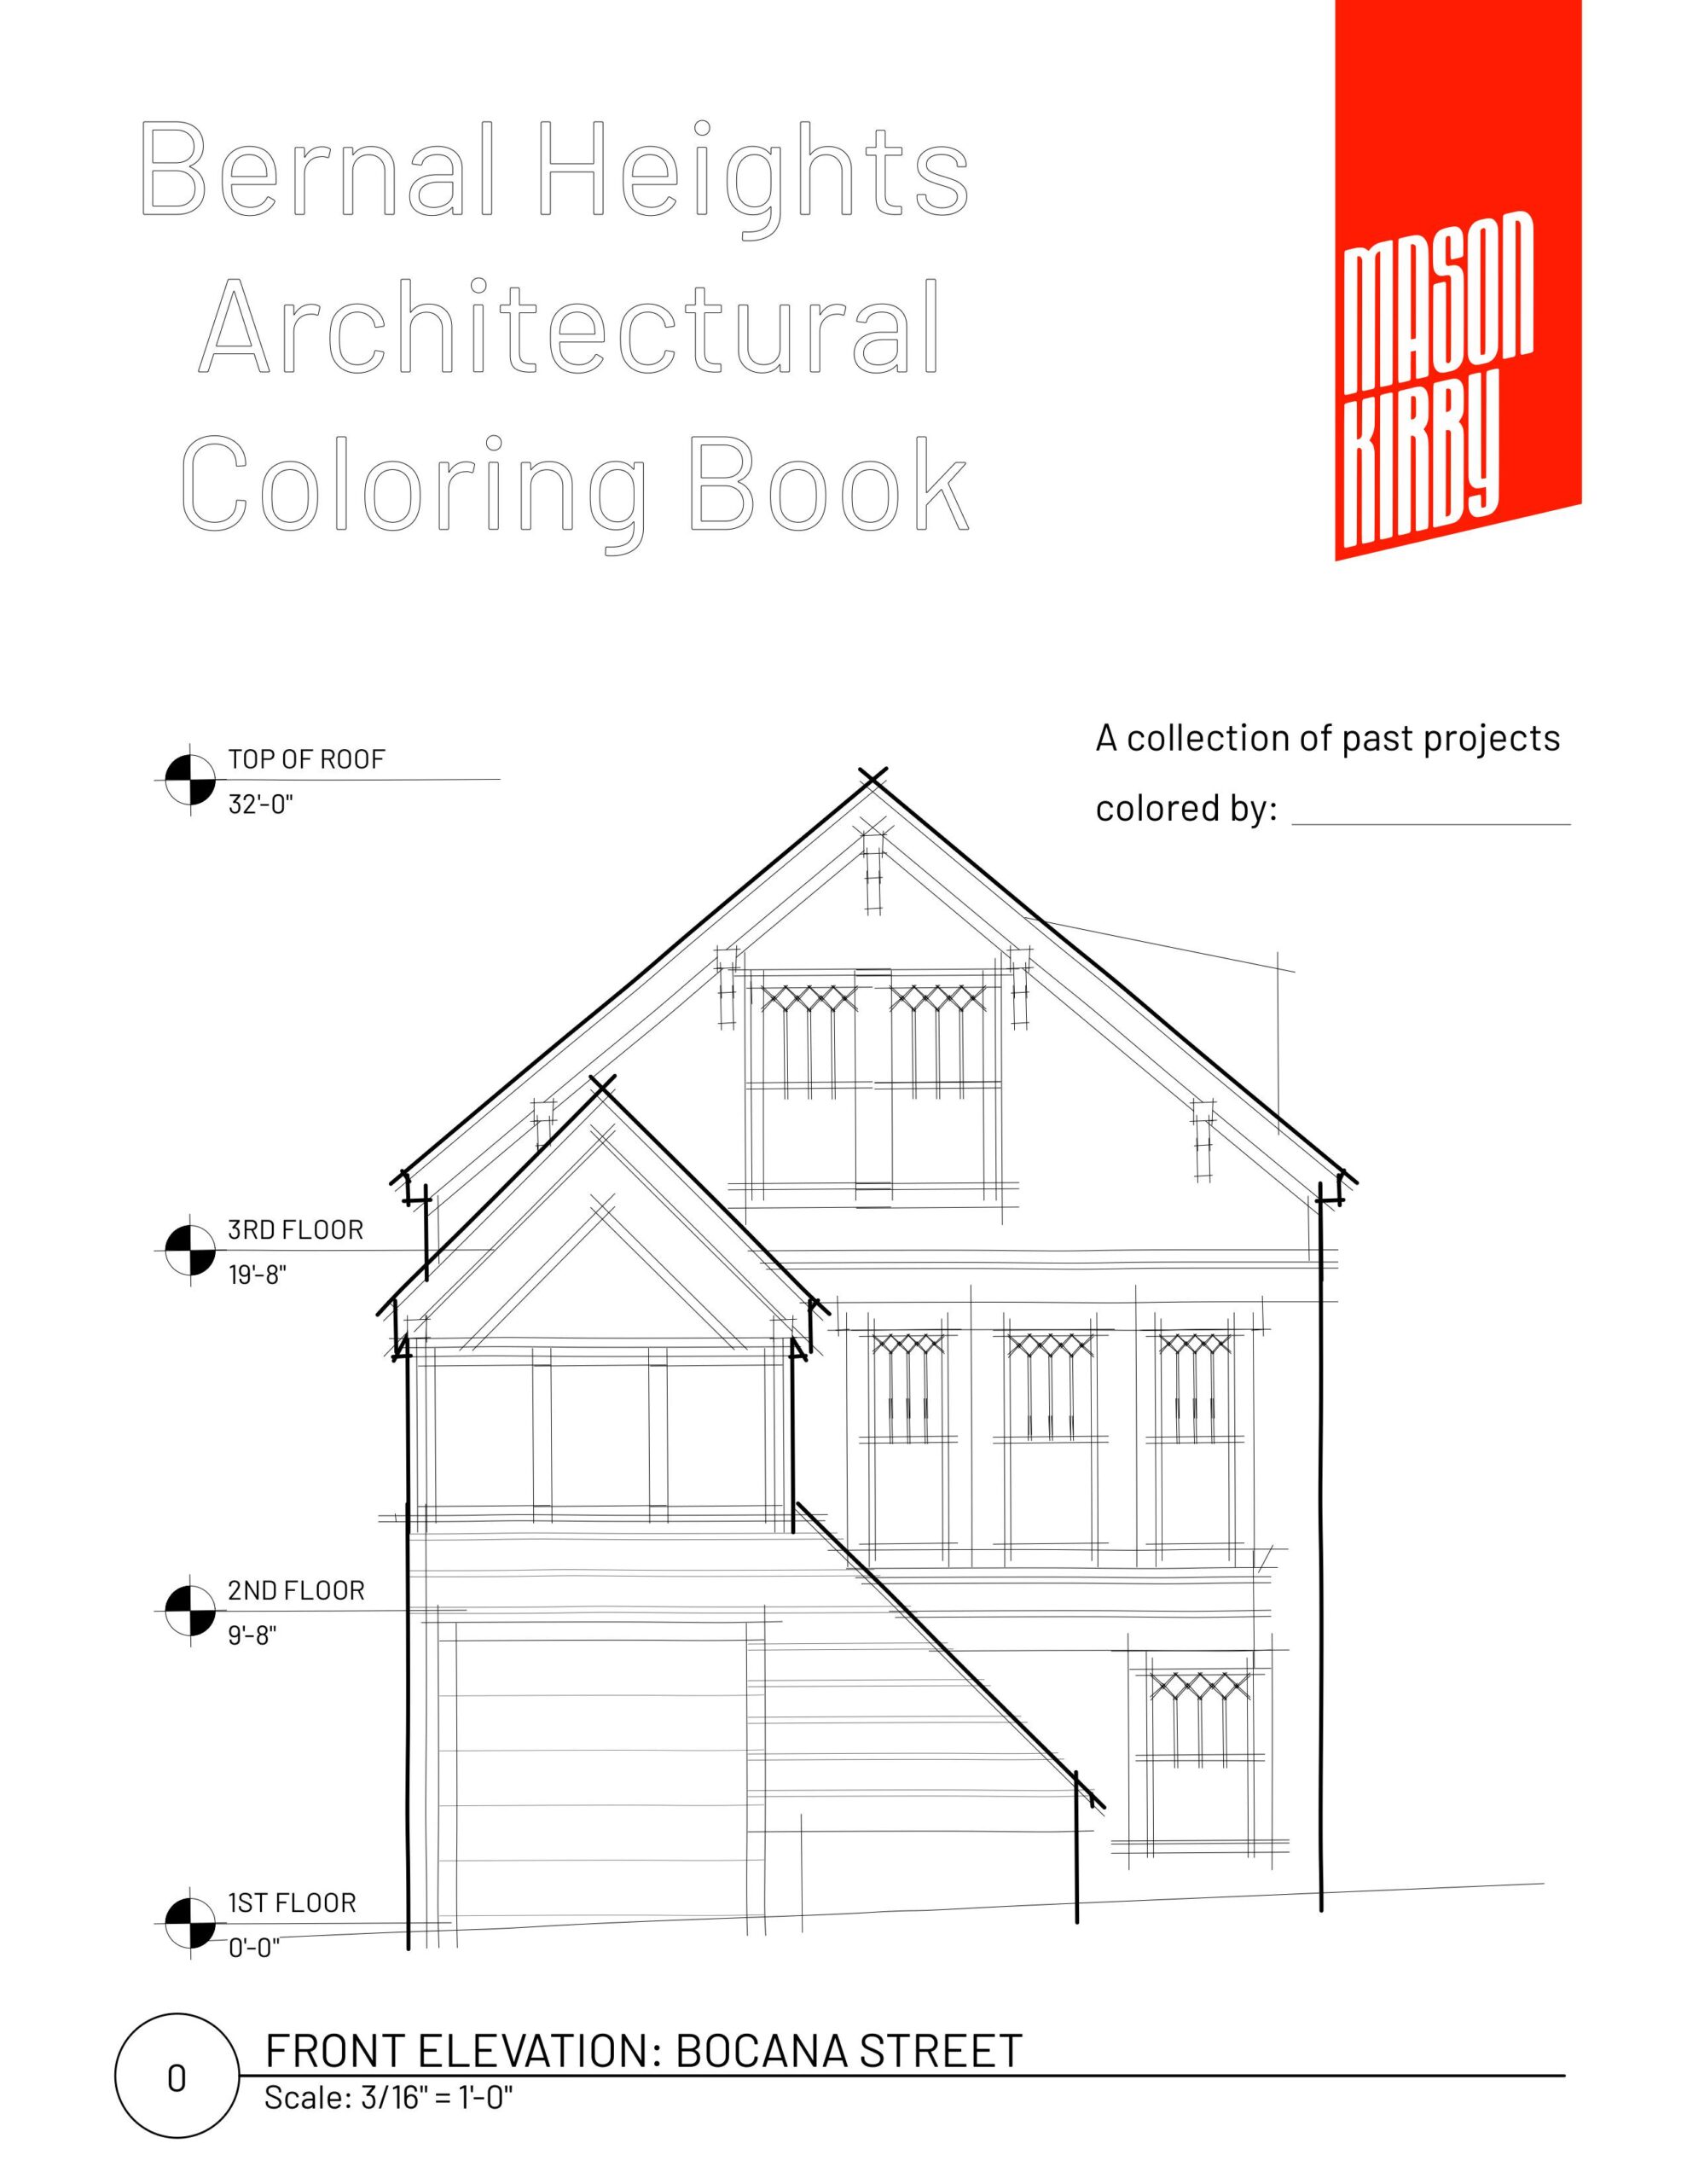 Mason Kirby Bernal Heights Architectural Coloring Book-001